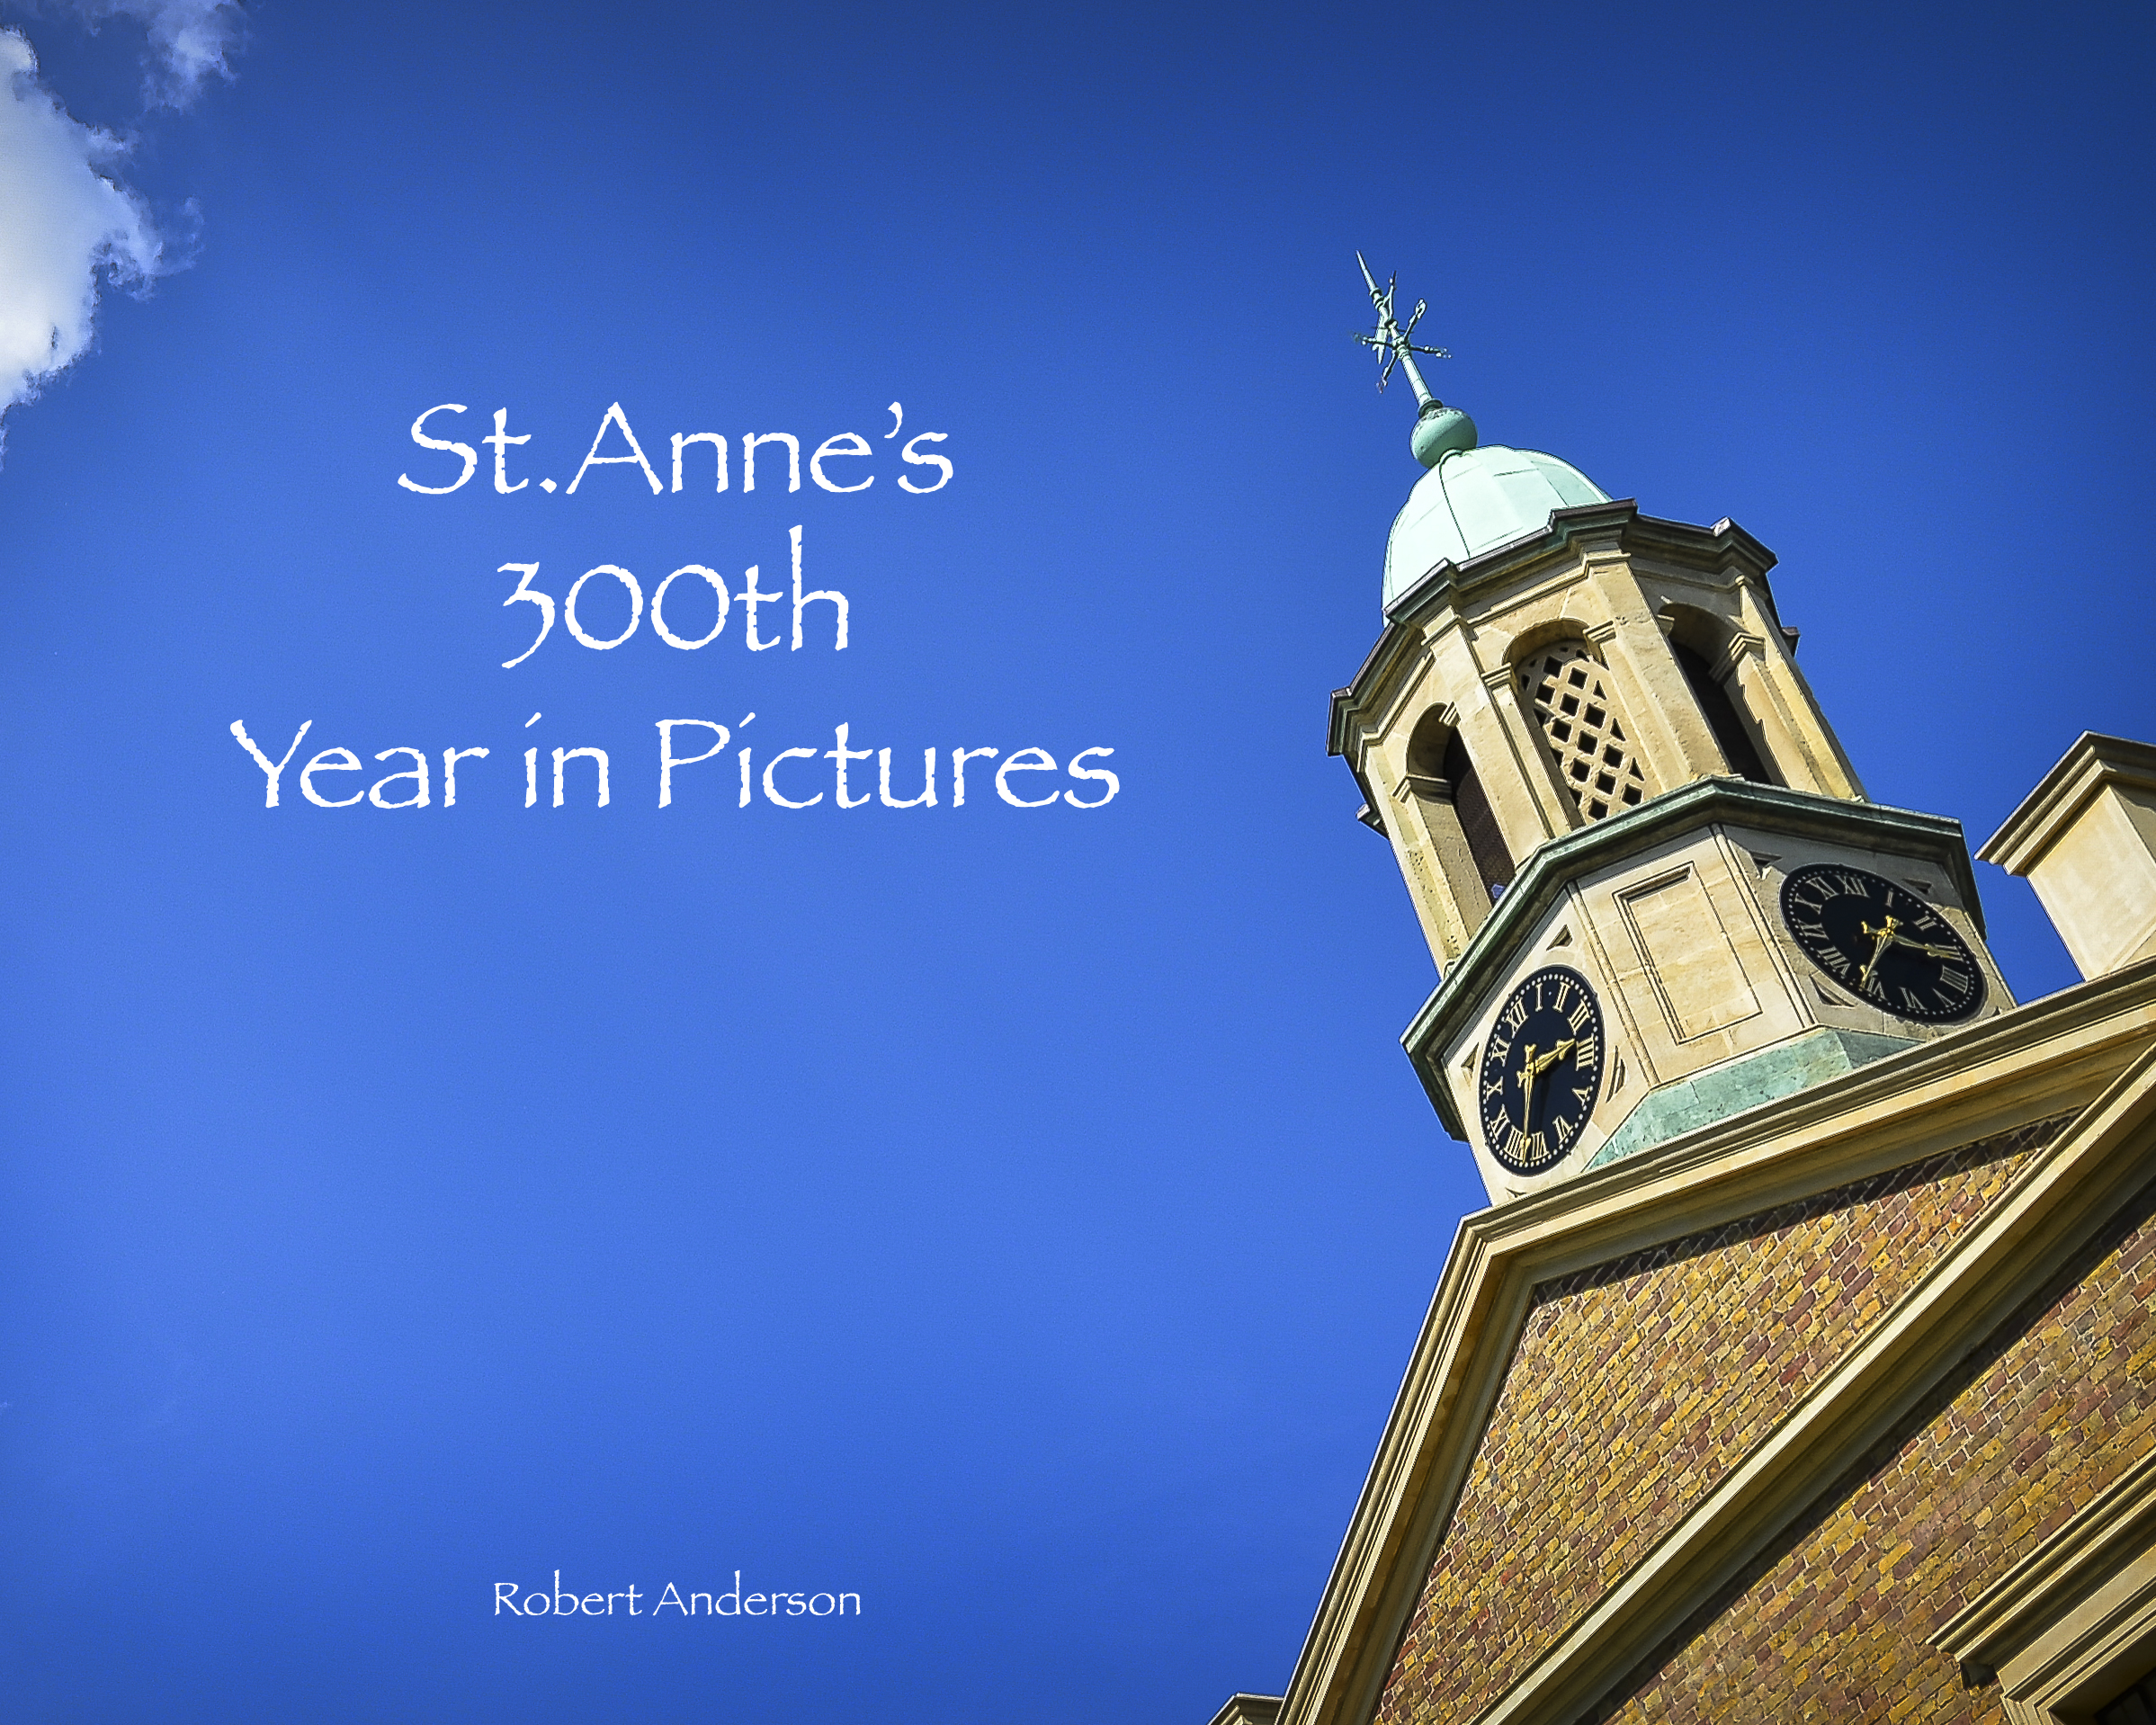 St. Anne’s 300th Year in Pictures